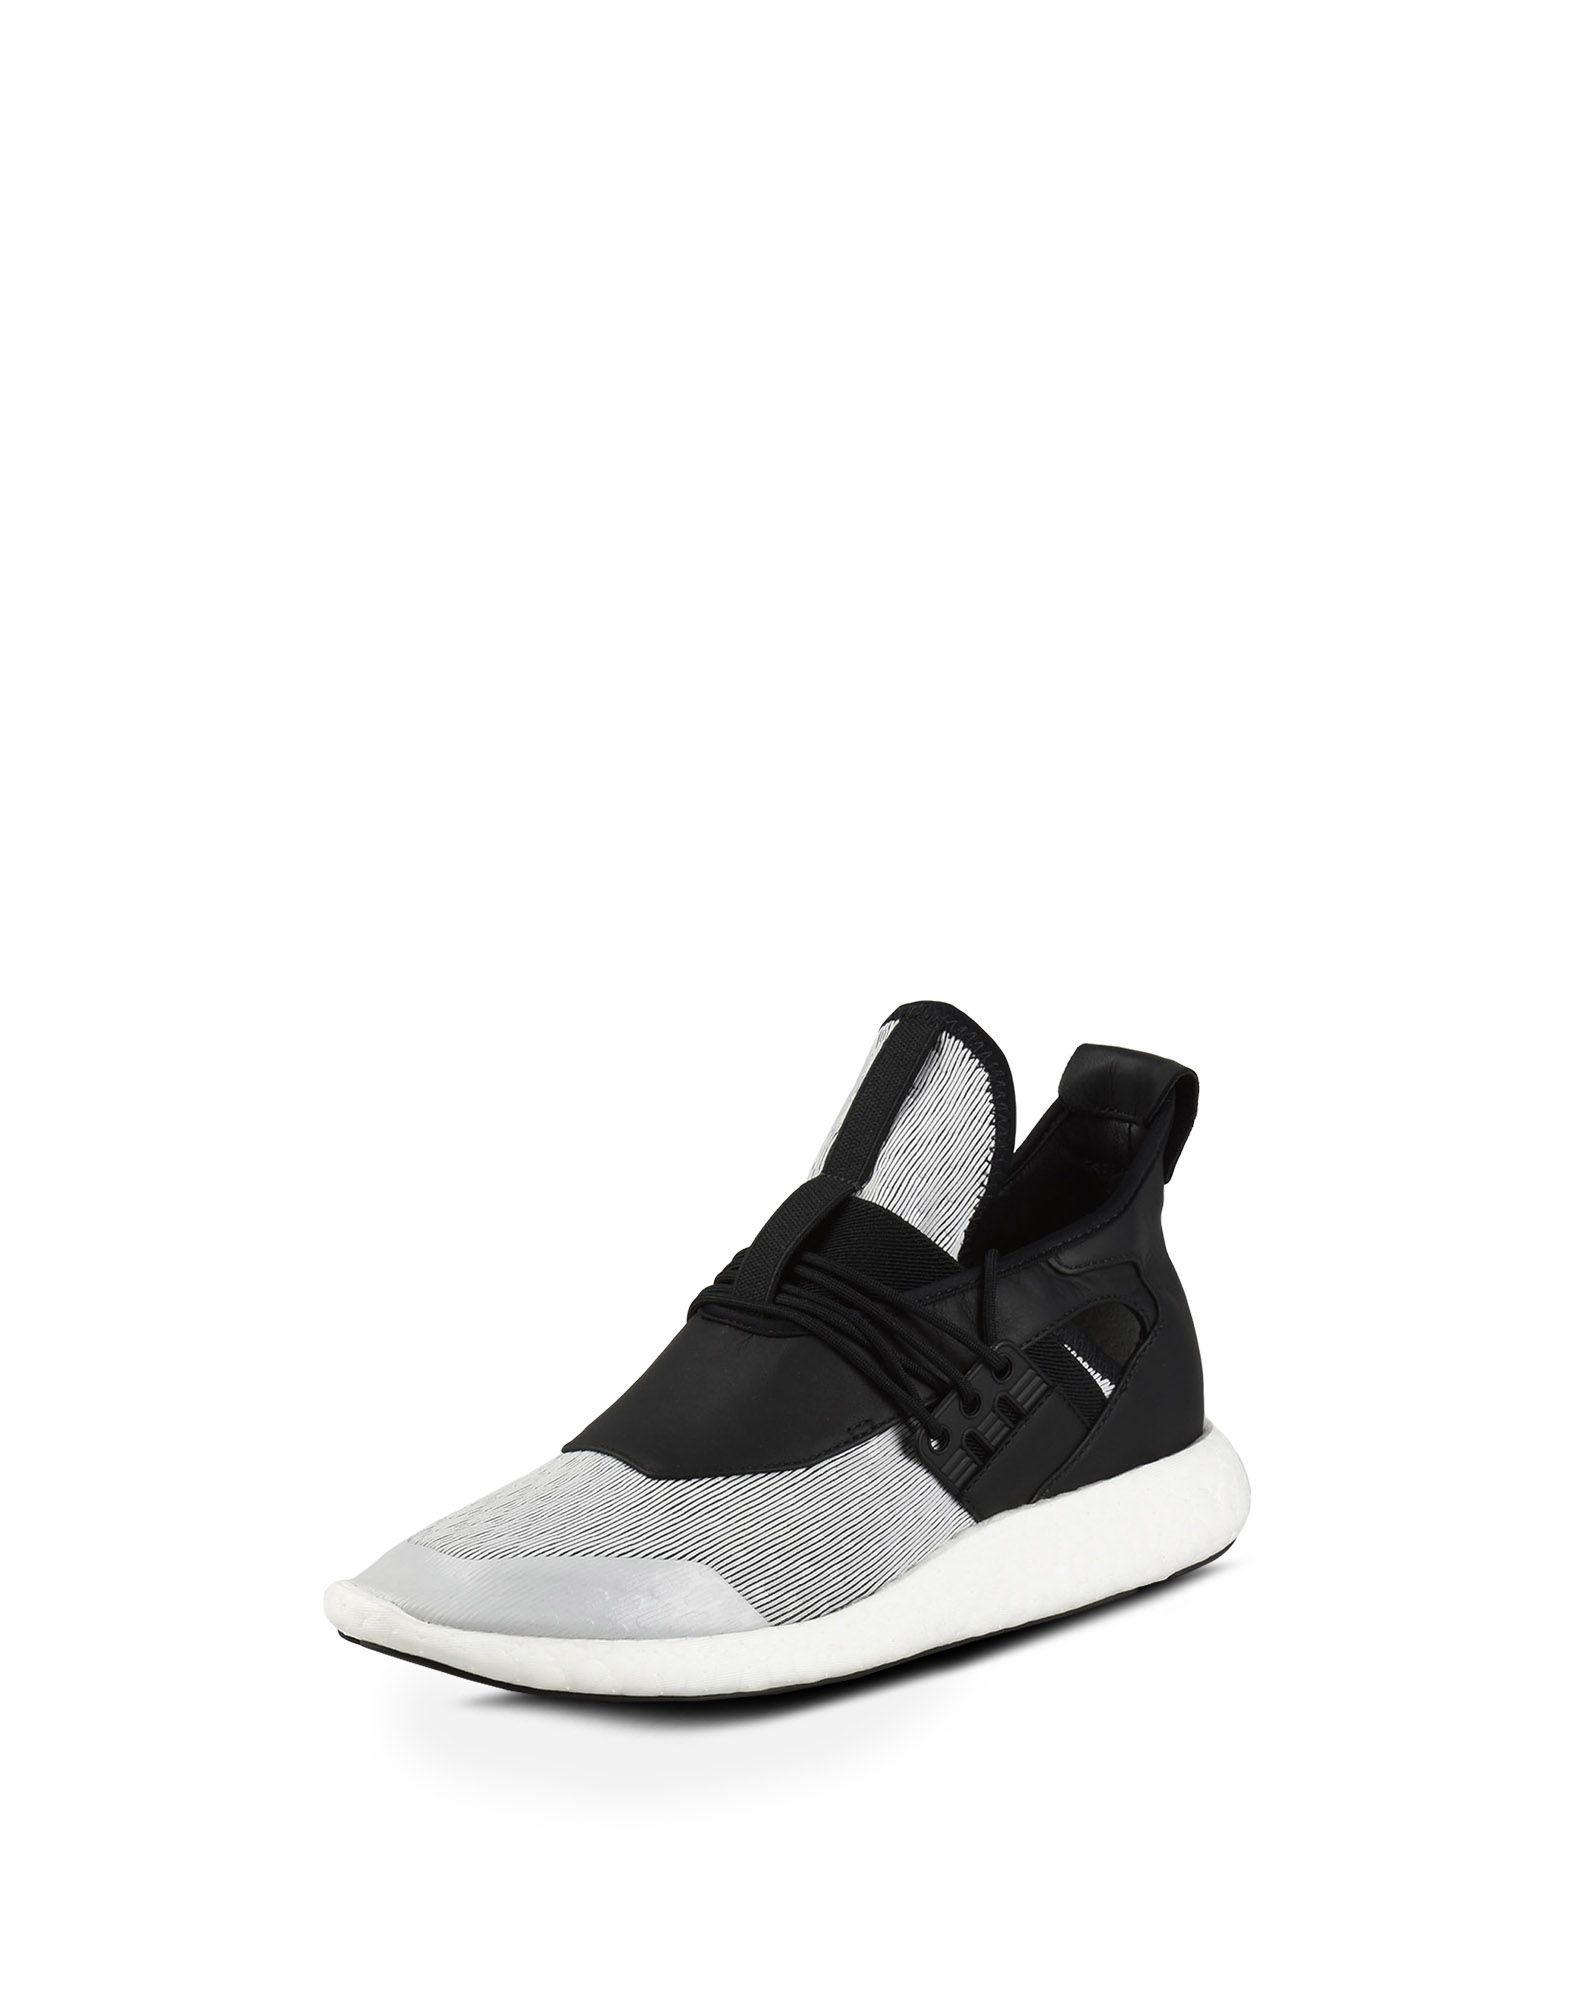 Y-3 Run Sneakers in Black for Women | Adidas Y-3 Official Store